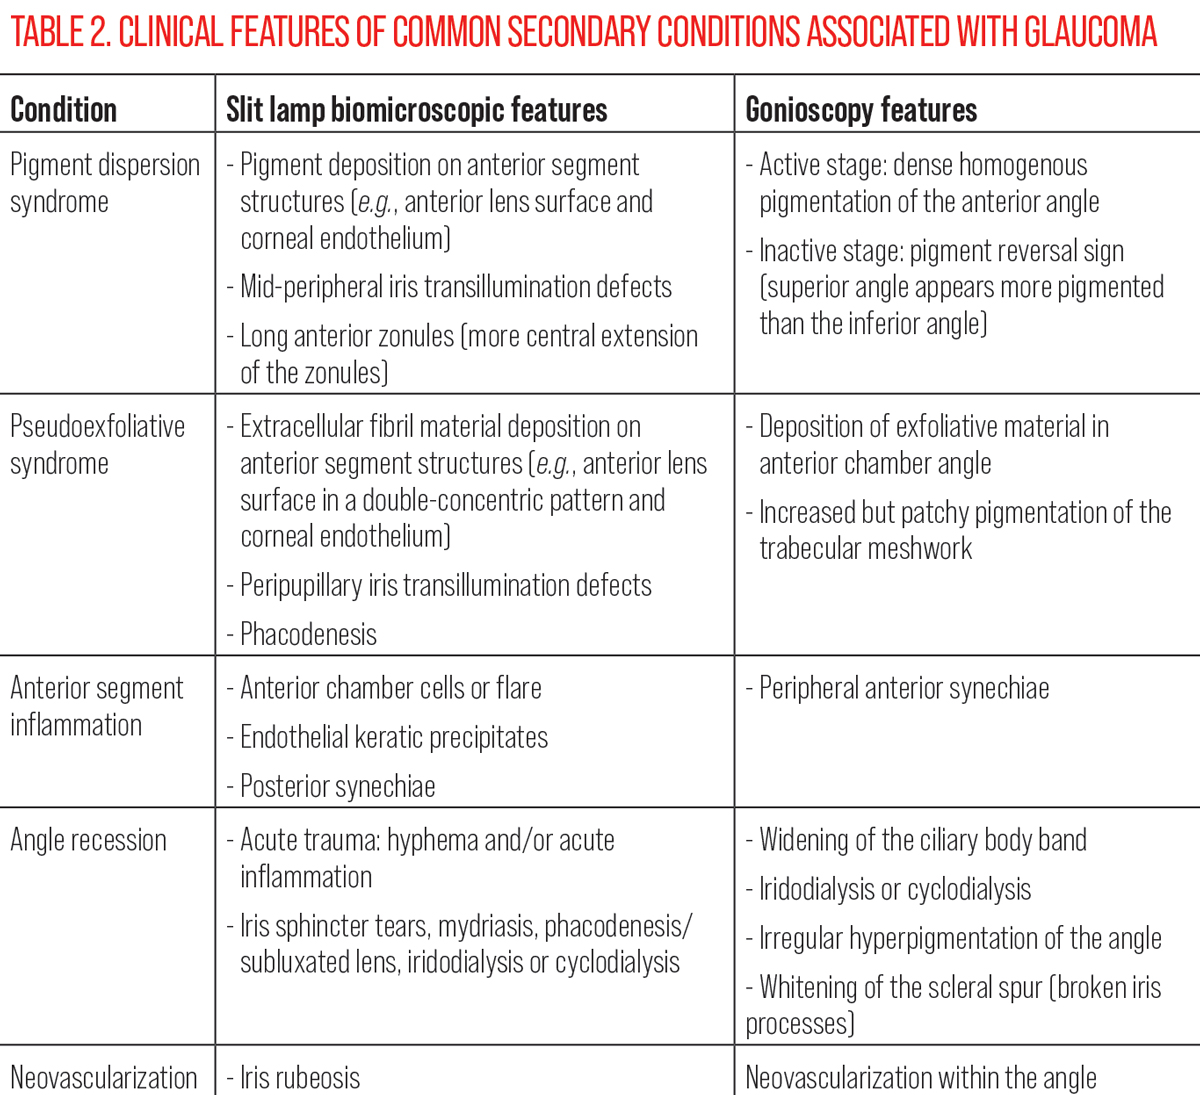 TABLE 2. CLINICAL FEATURES OF COMMON SECONDARY CONDITIONS ASSOCIATED WITH GLAUCOMA 